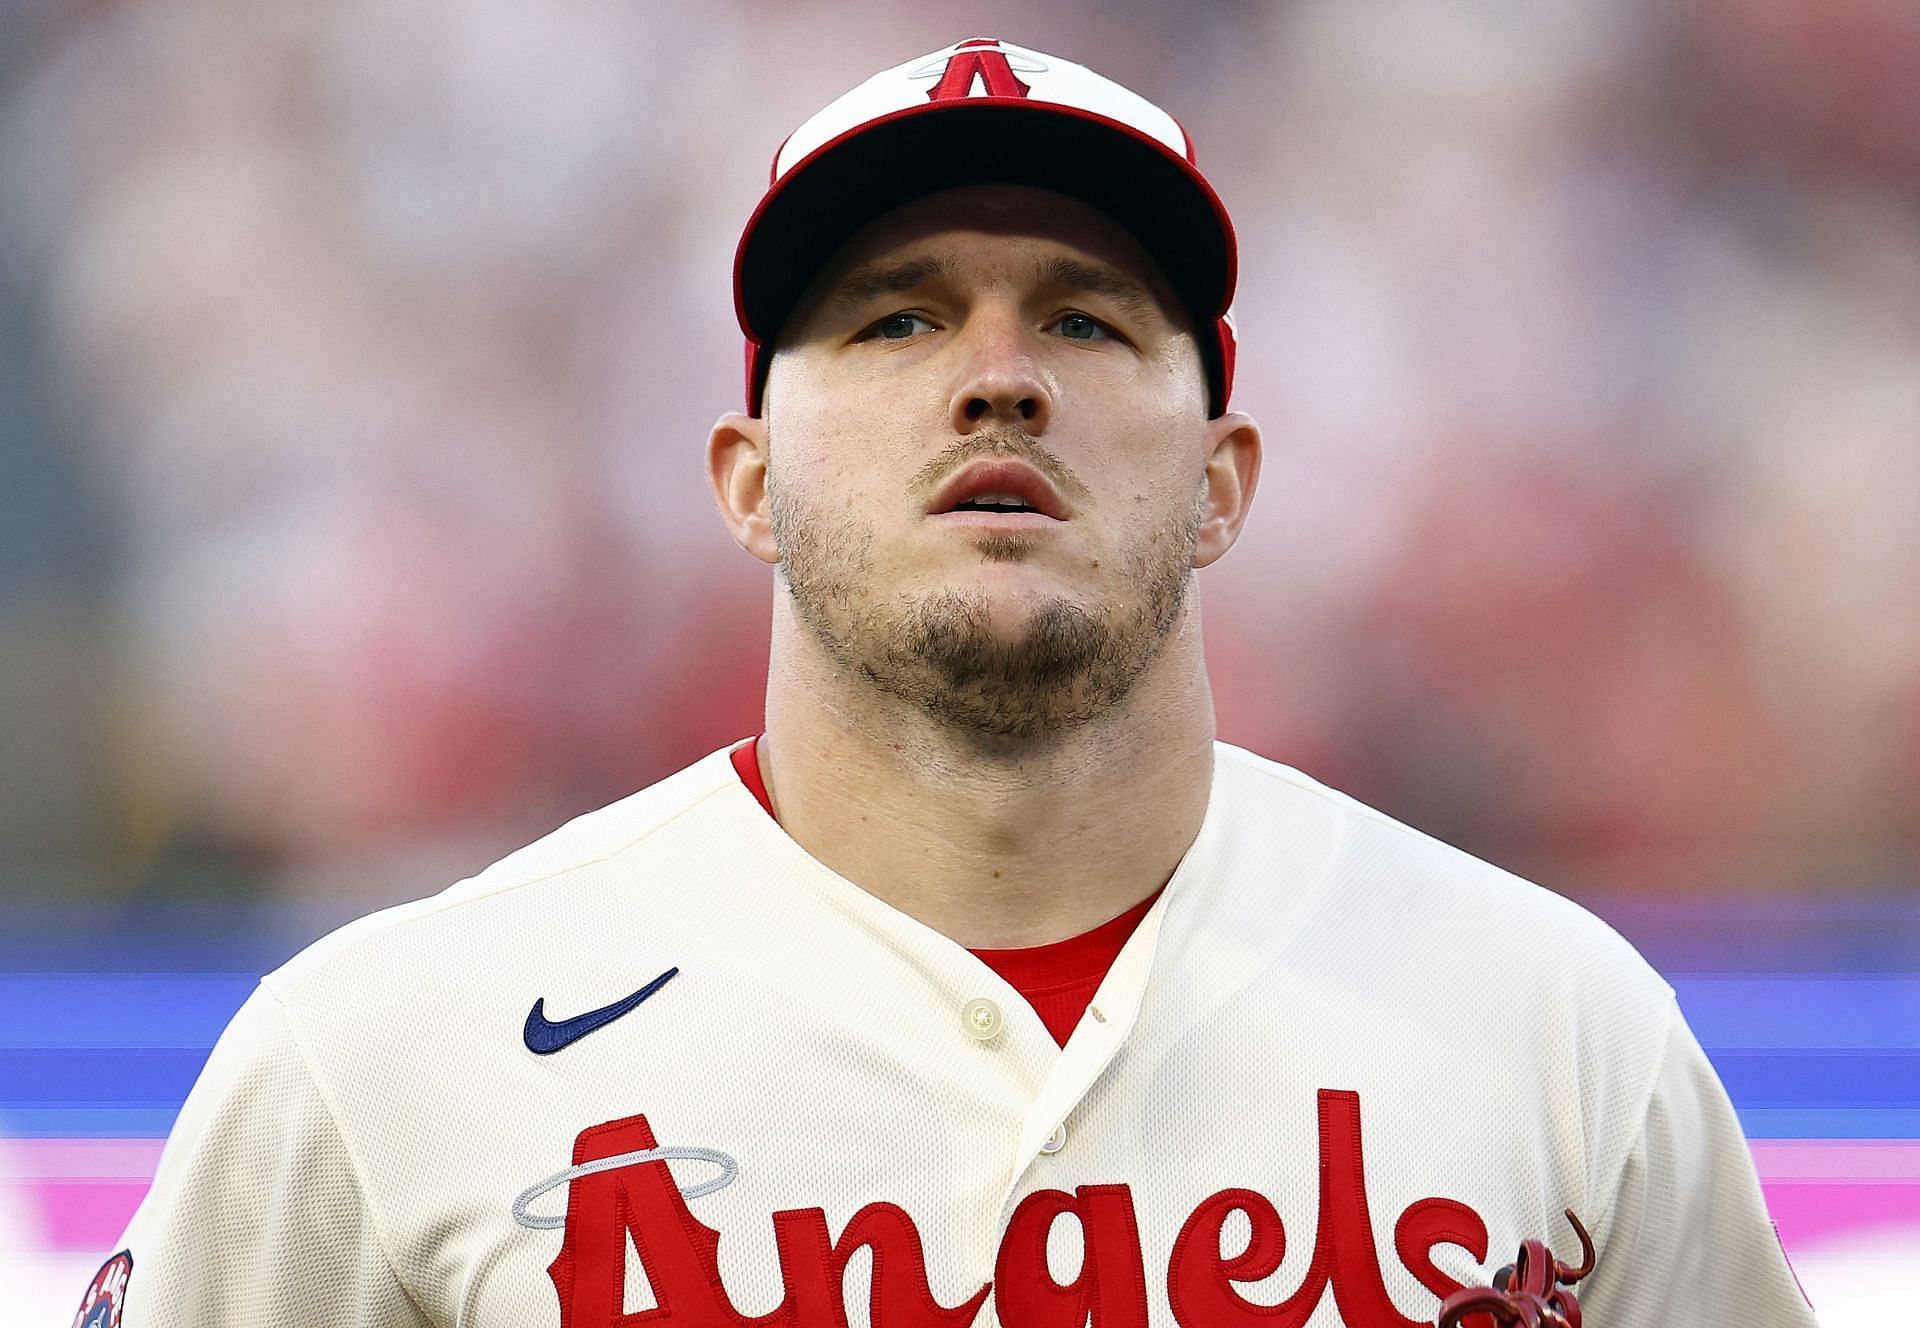 How Many Mvp Awards Has Mike Trout Won 0440